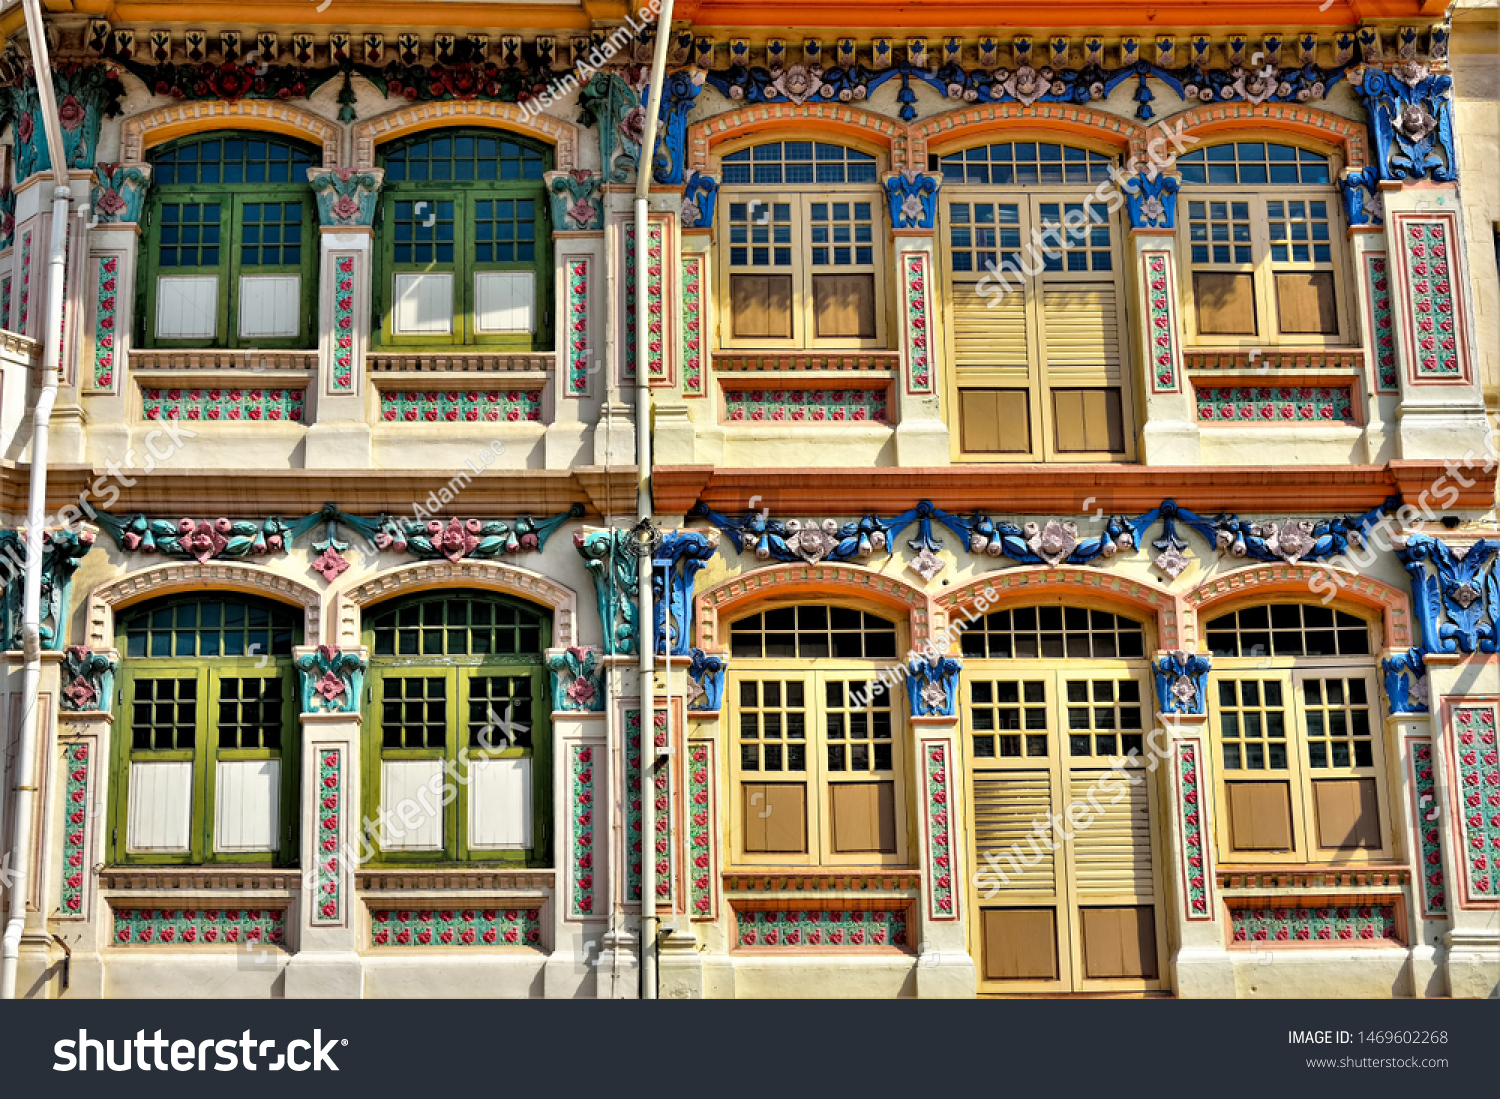 Front view of traditional Straits Chinese or Peranakan Singapore shop house exteriors with arched windows, antique wooden shutters and colourful exterior in Jalan Besar, Singapore
 #1469602268